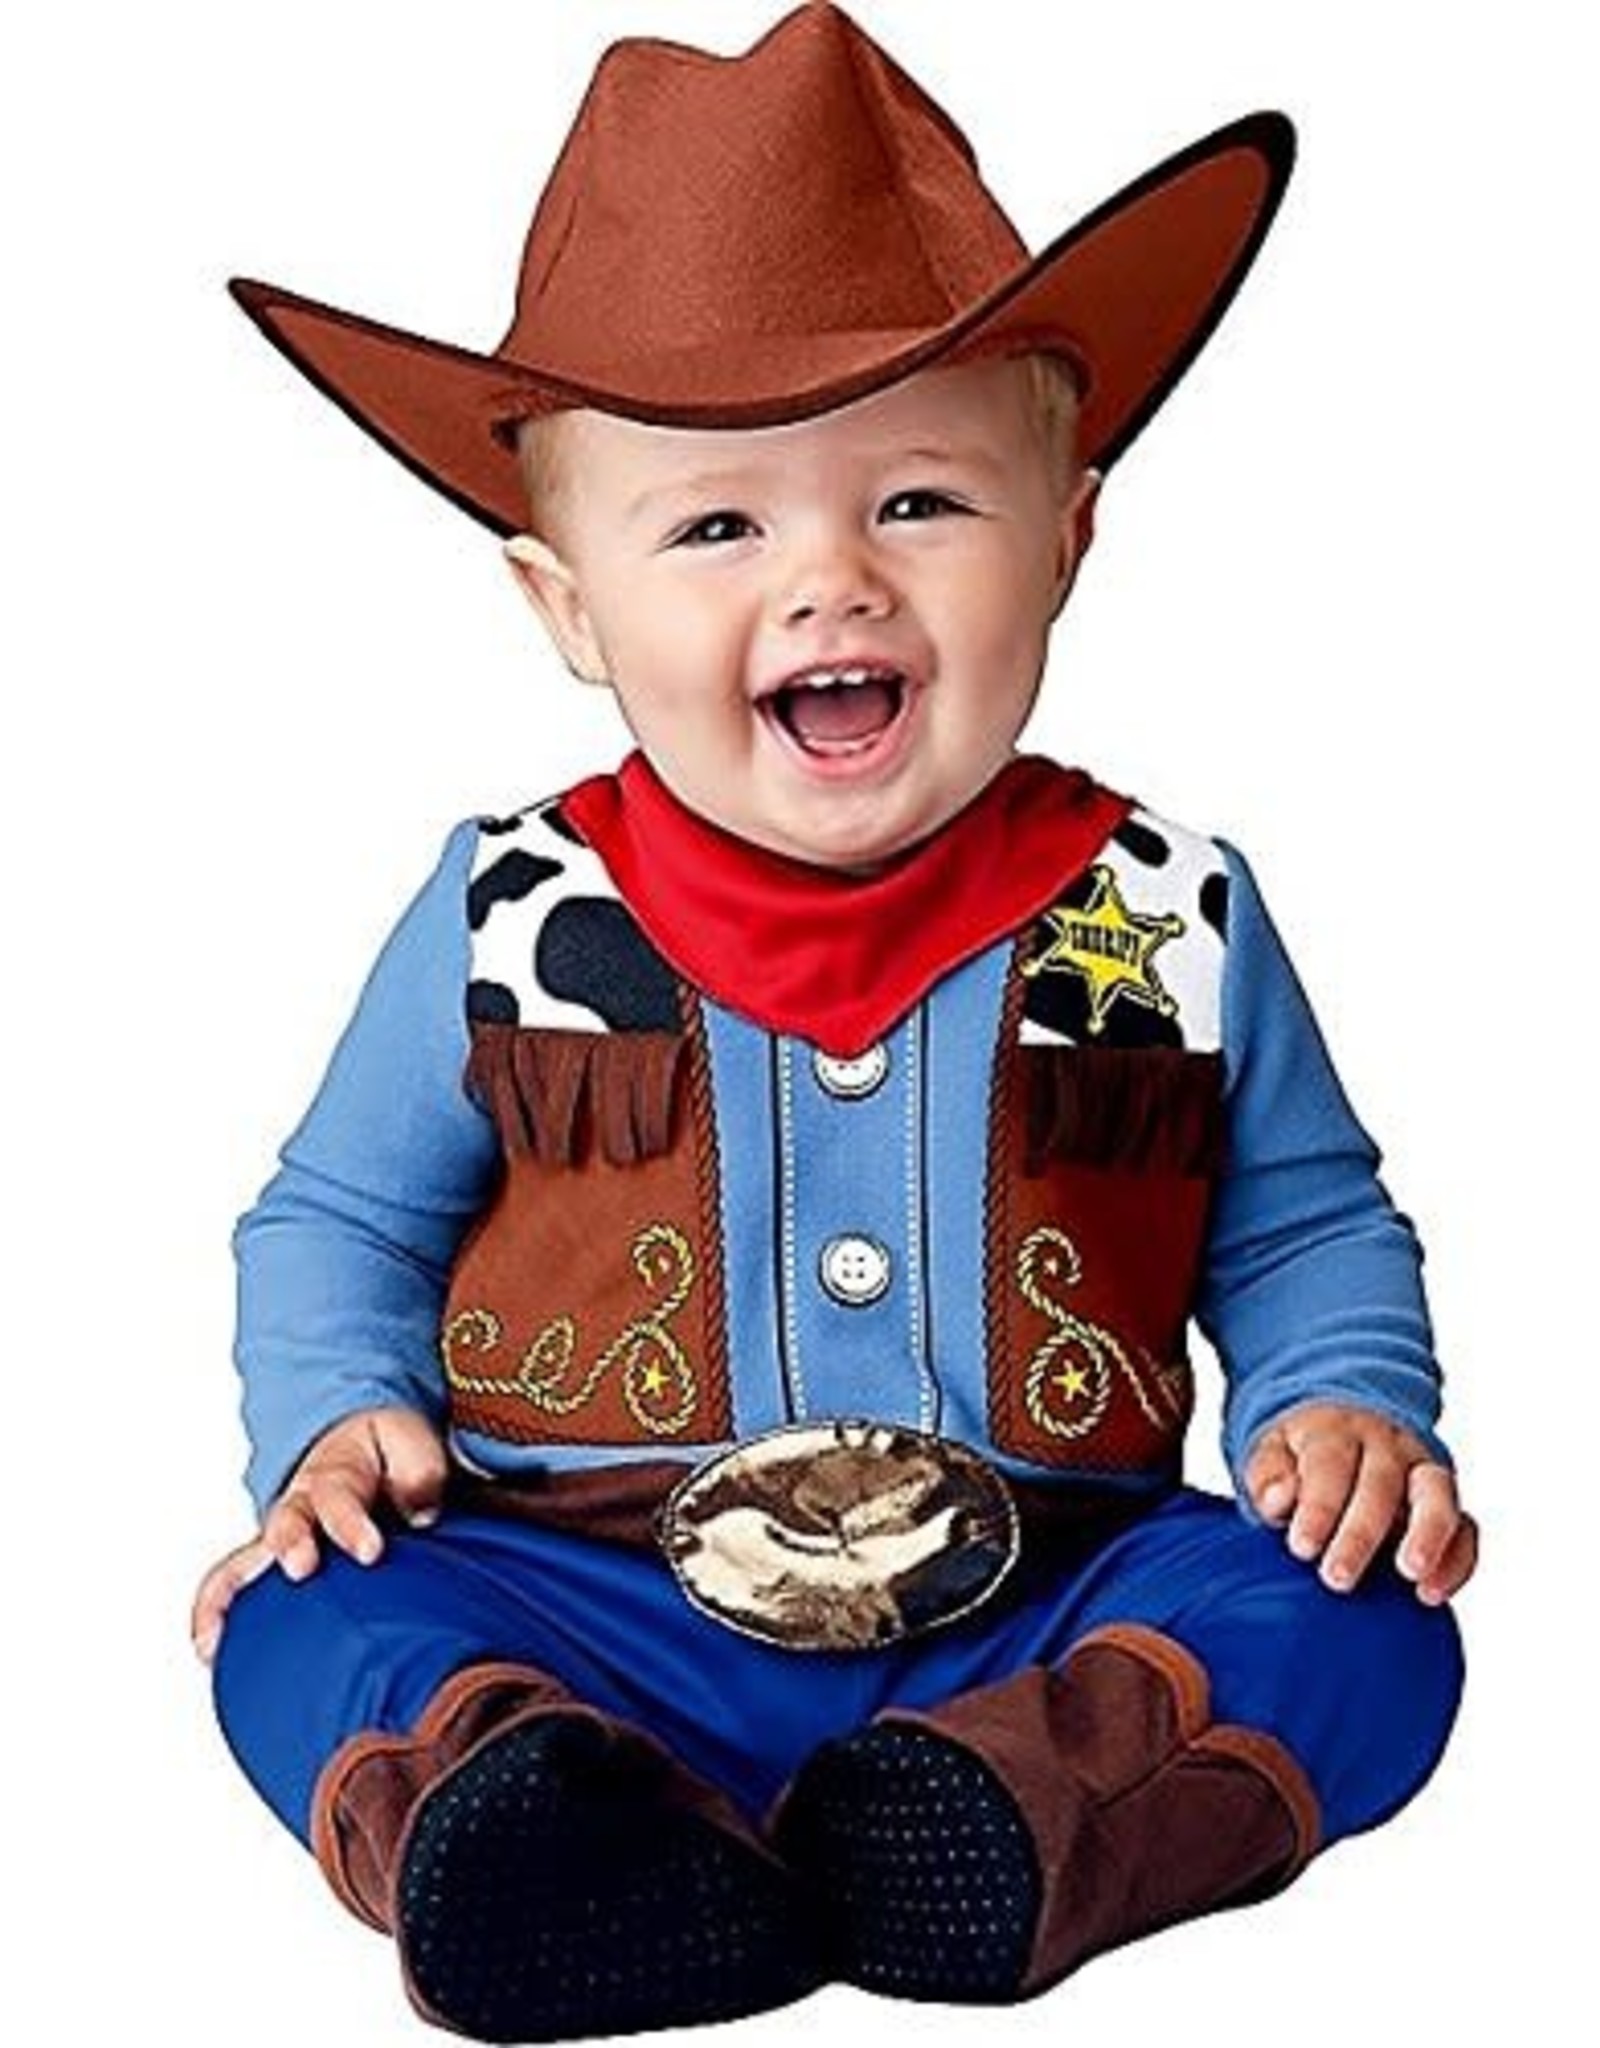 Incharacter Costumes Wee Wrangler, Multi, 18-24 Months (Toddler), 10624